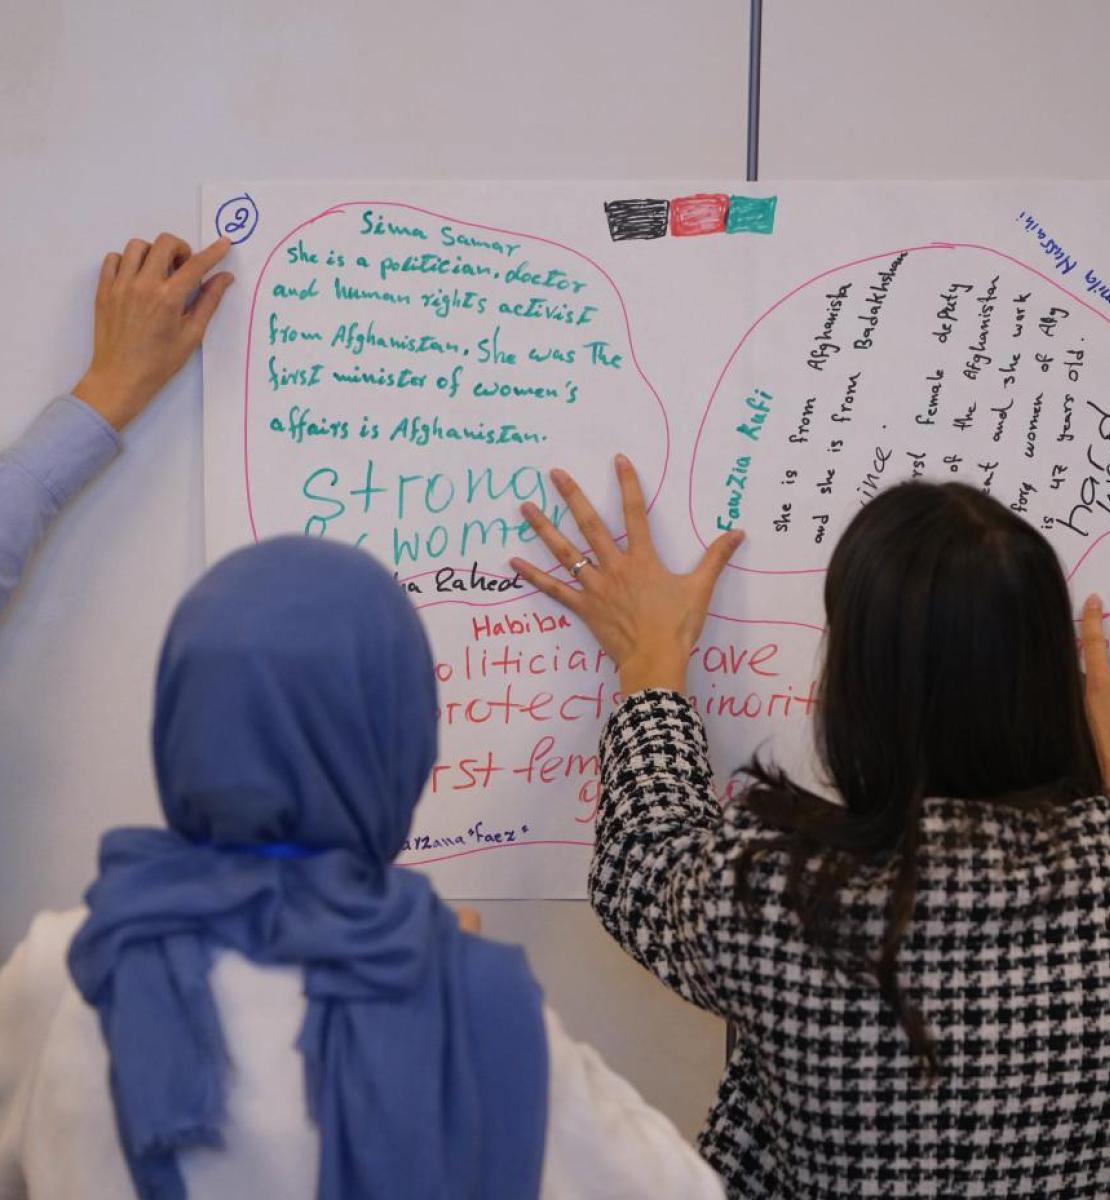 Three women work on a whiteboard and point to scribbled notes, with their backs facing the camera.